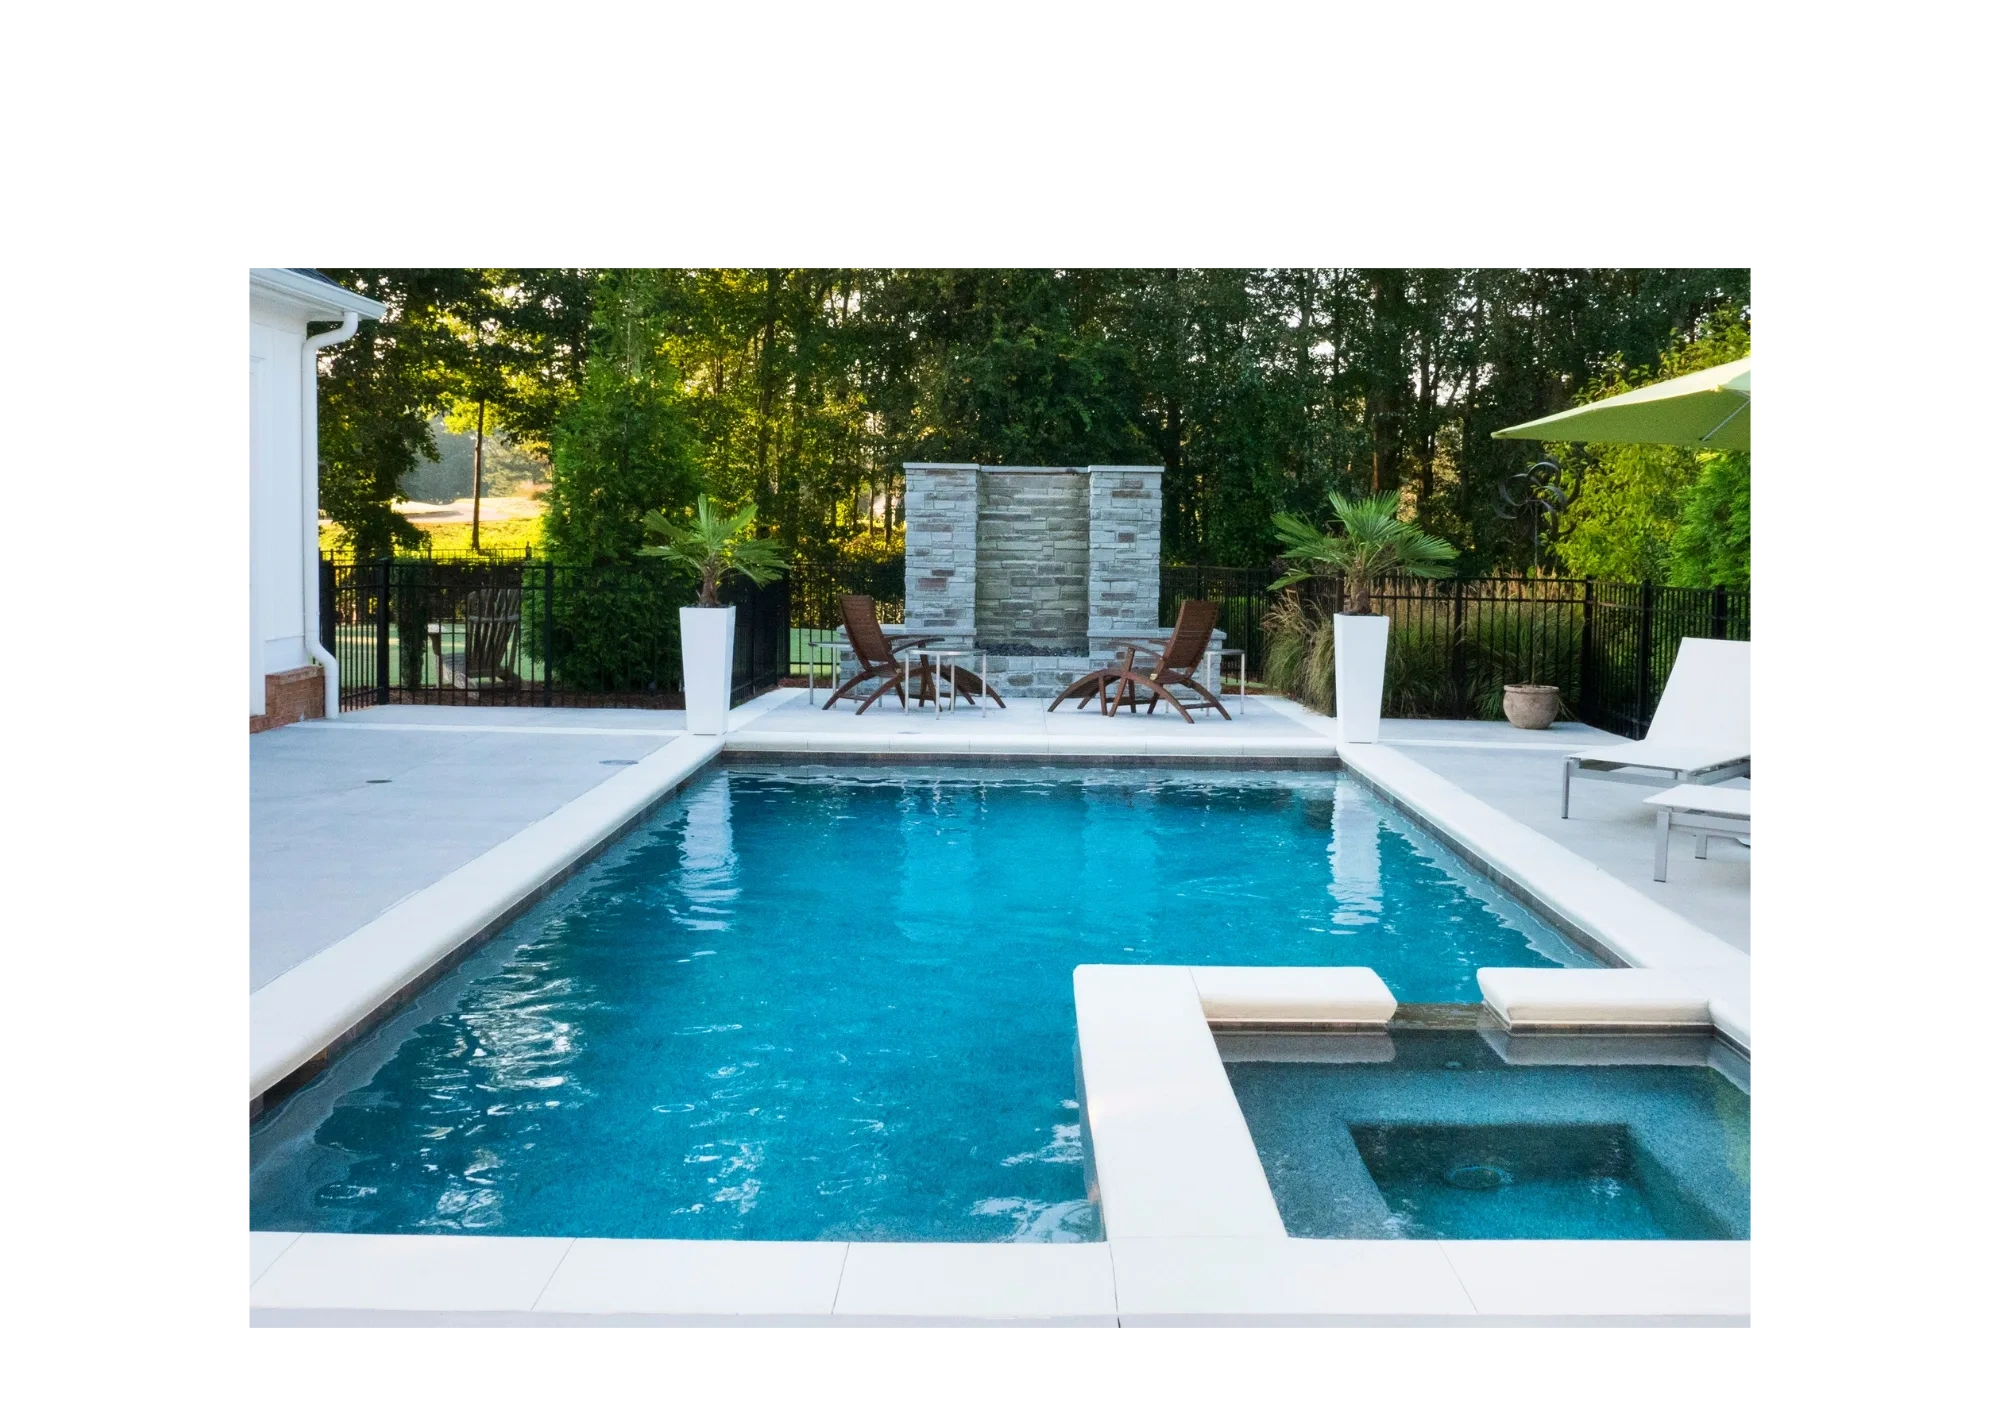 Pool Service - Marco Polo Pool Service New Jersey